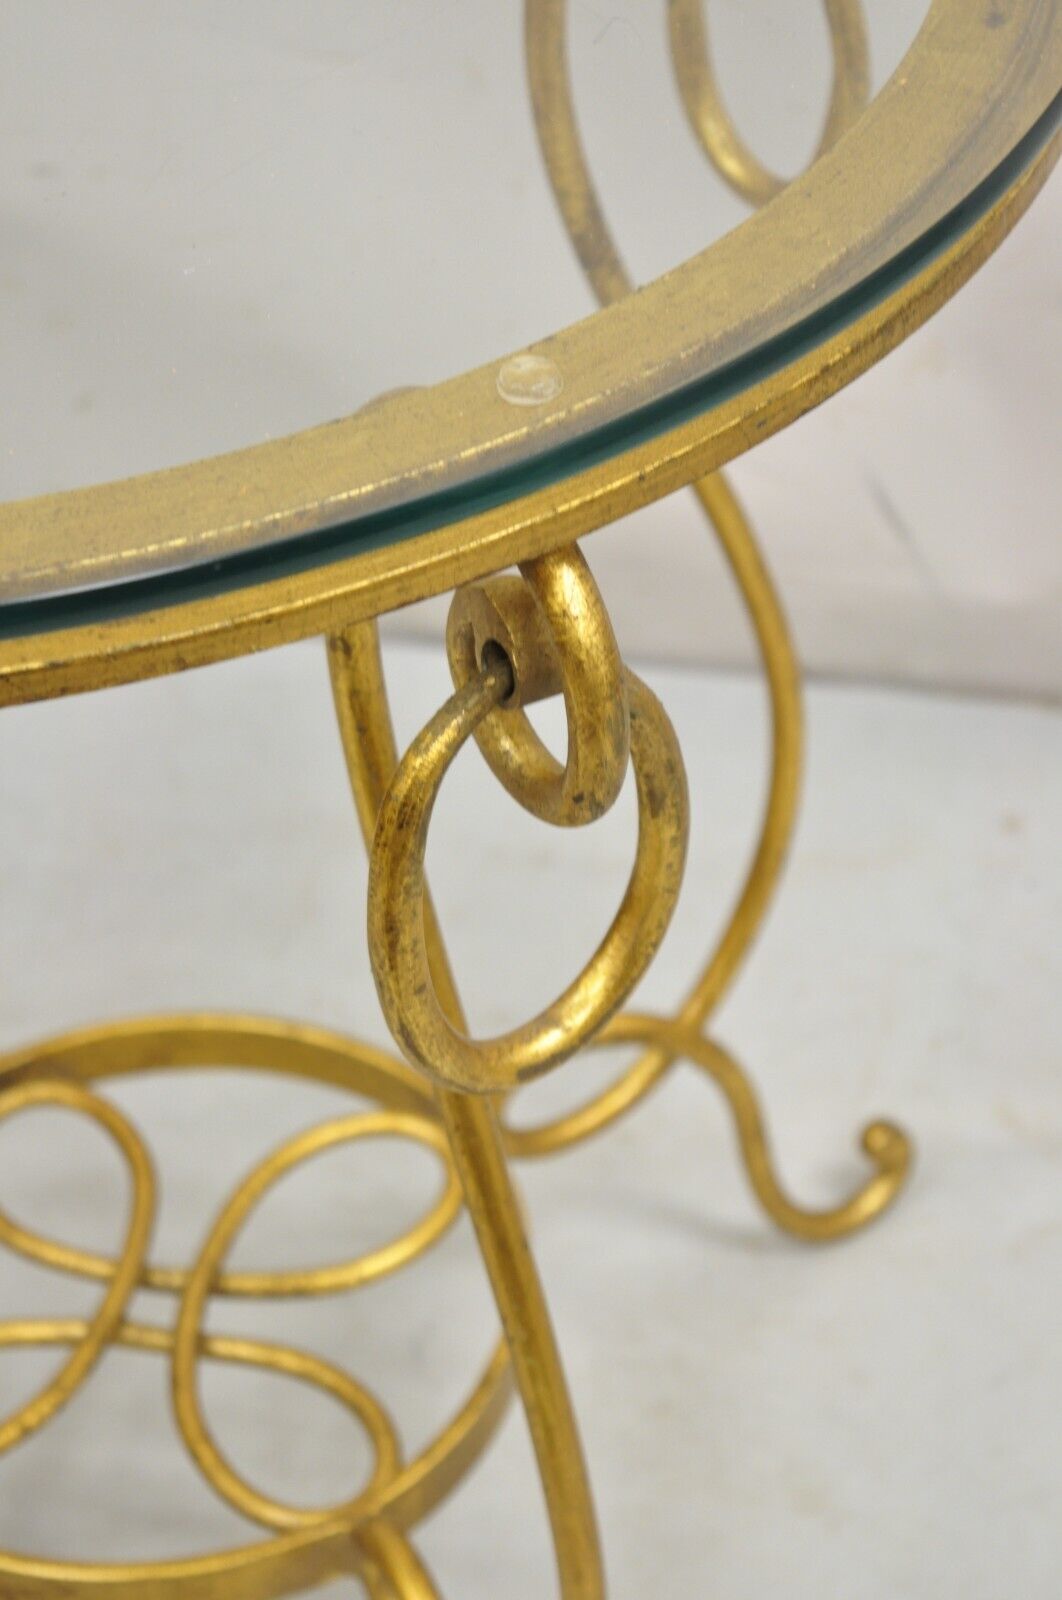 Gold Gilt French René Drouet Style Scrolling Iron Round Glass Accent Side Table